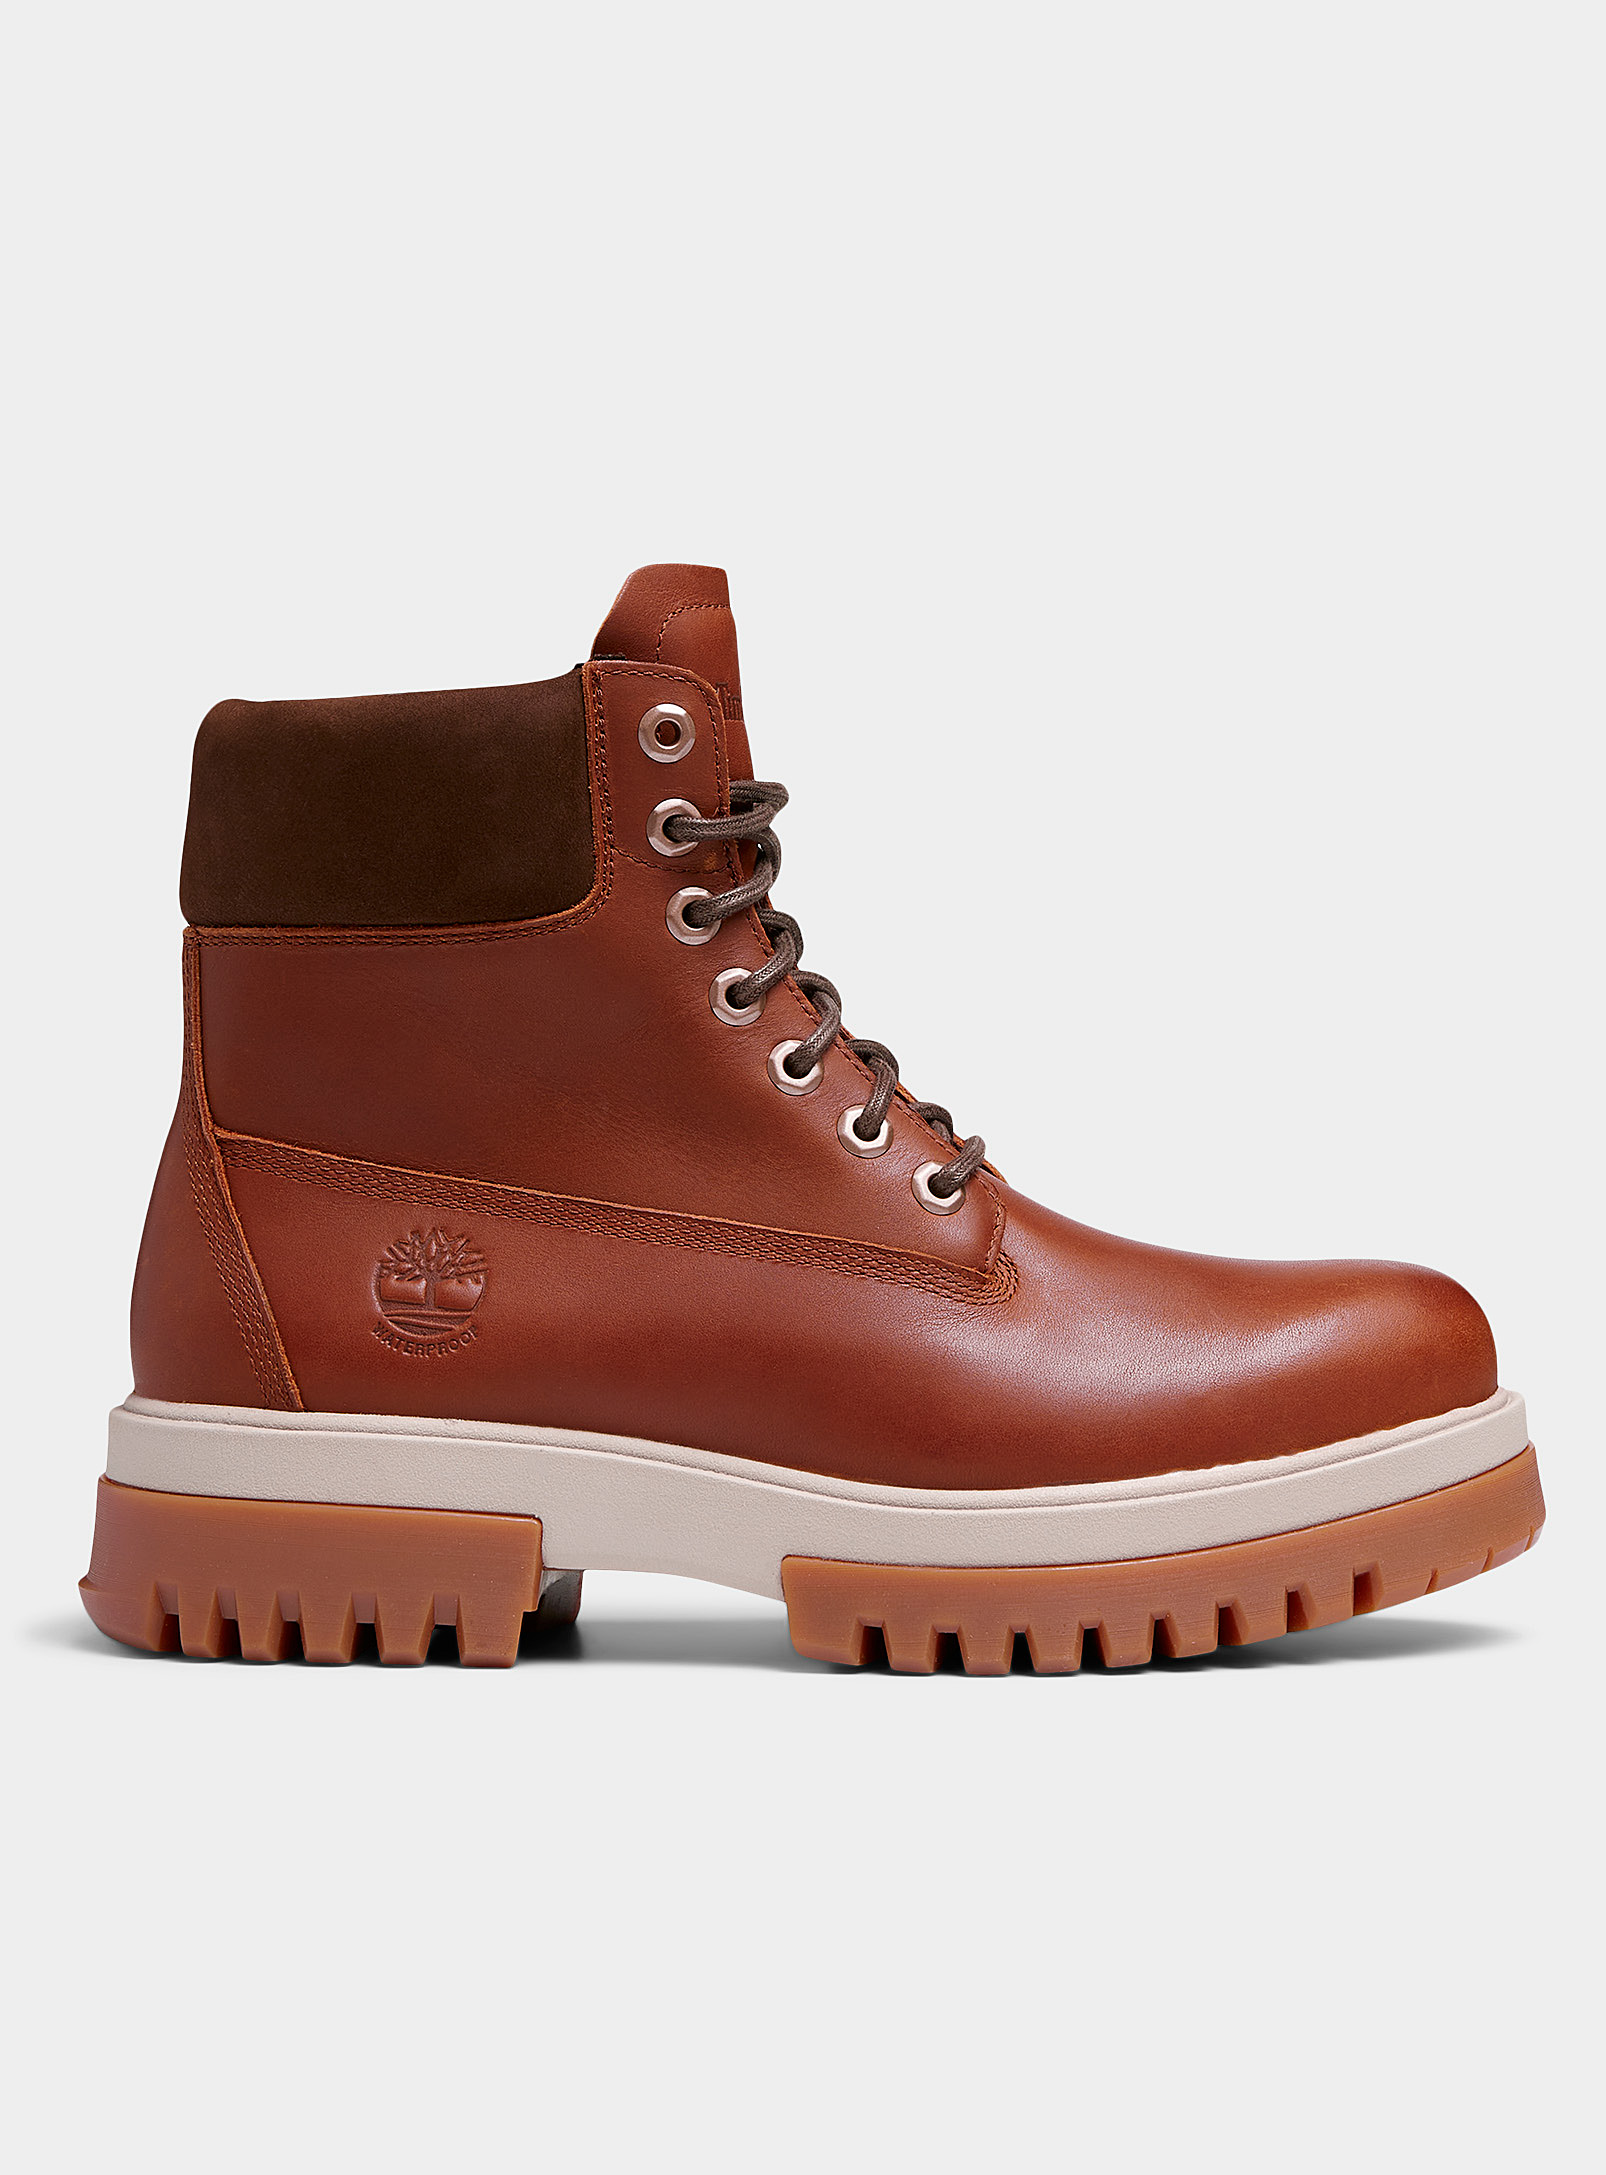 Timberland - Men's Arbor Road laced boots Men